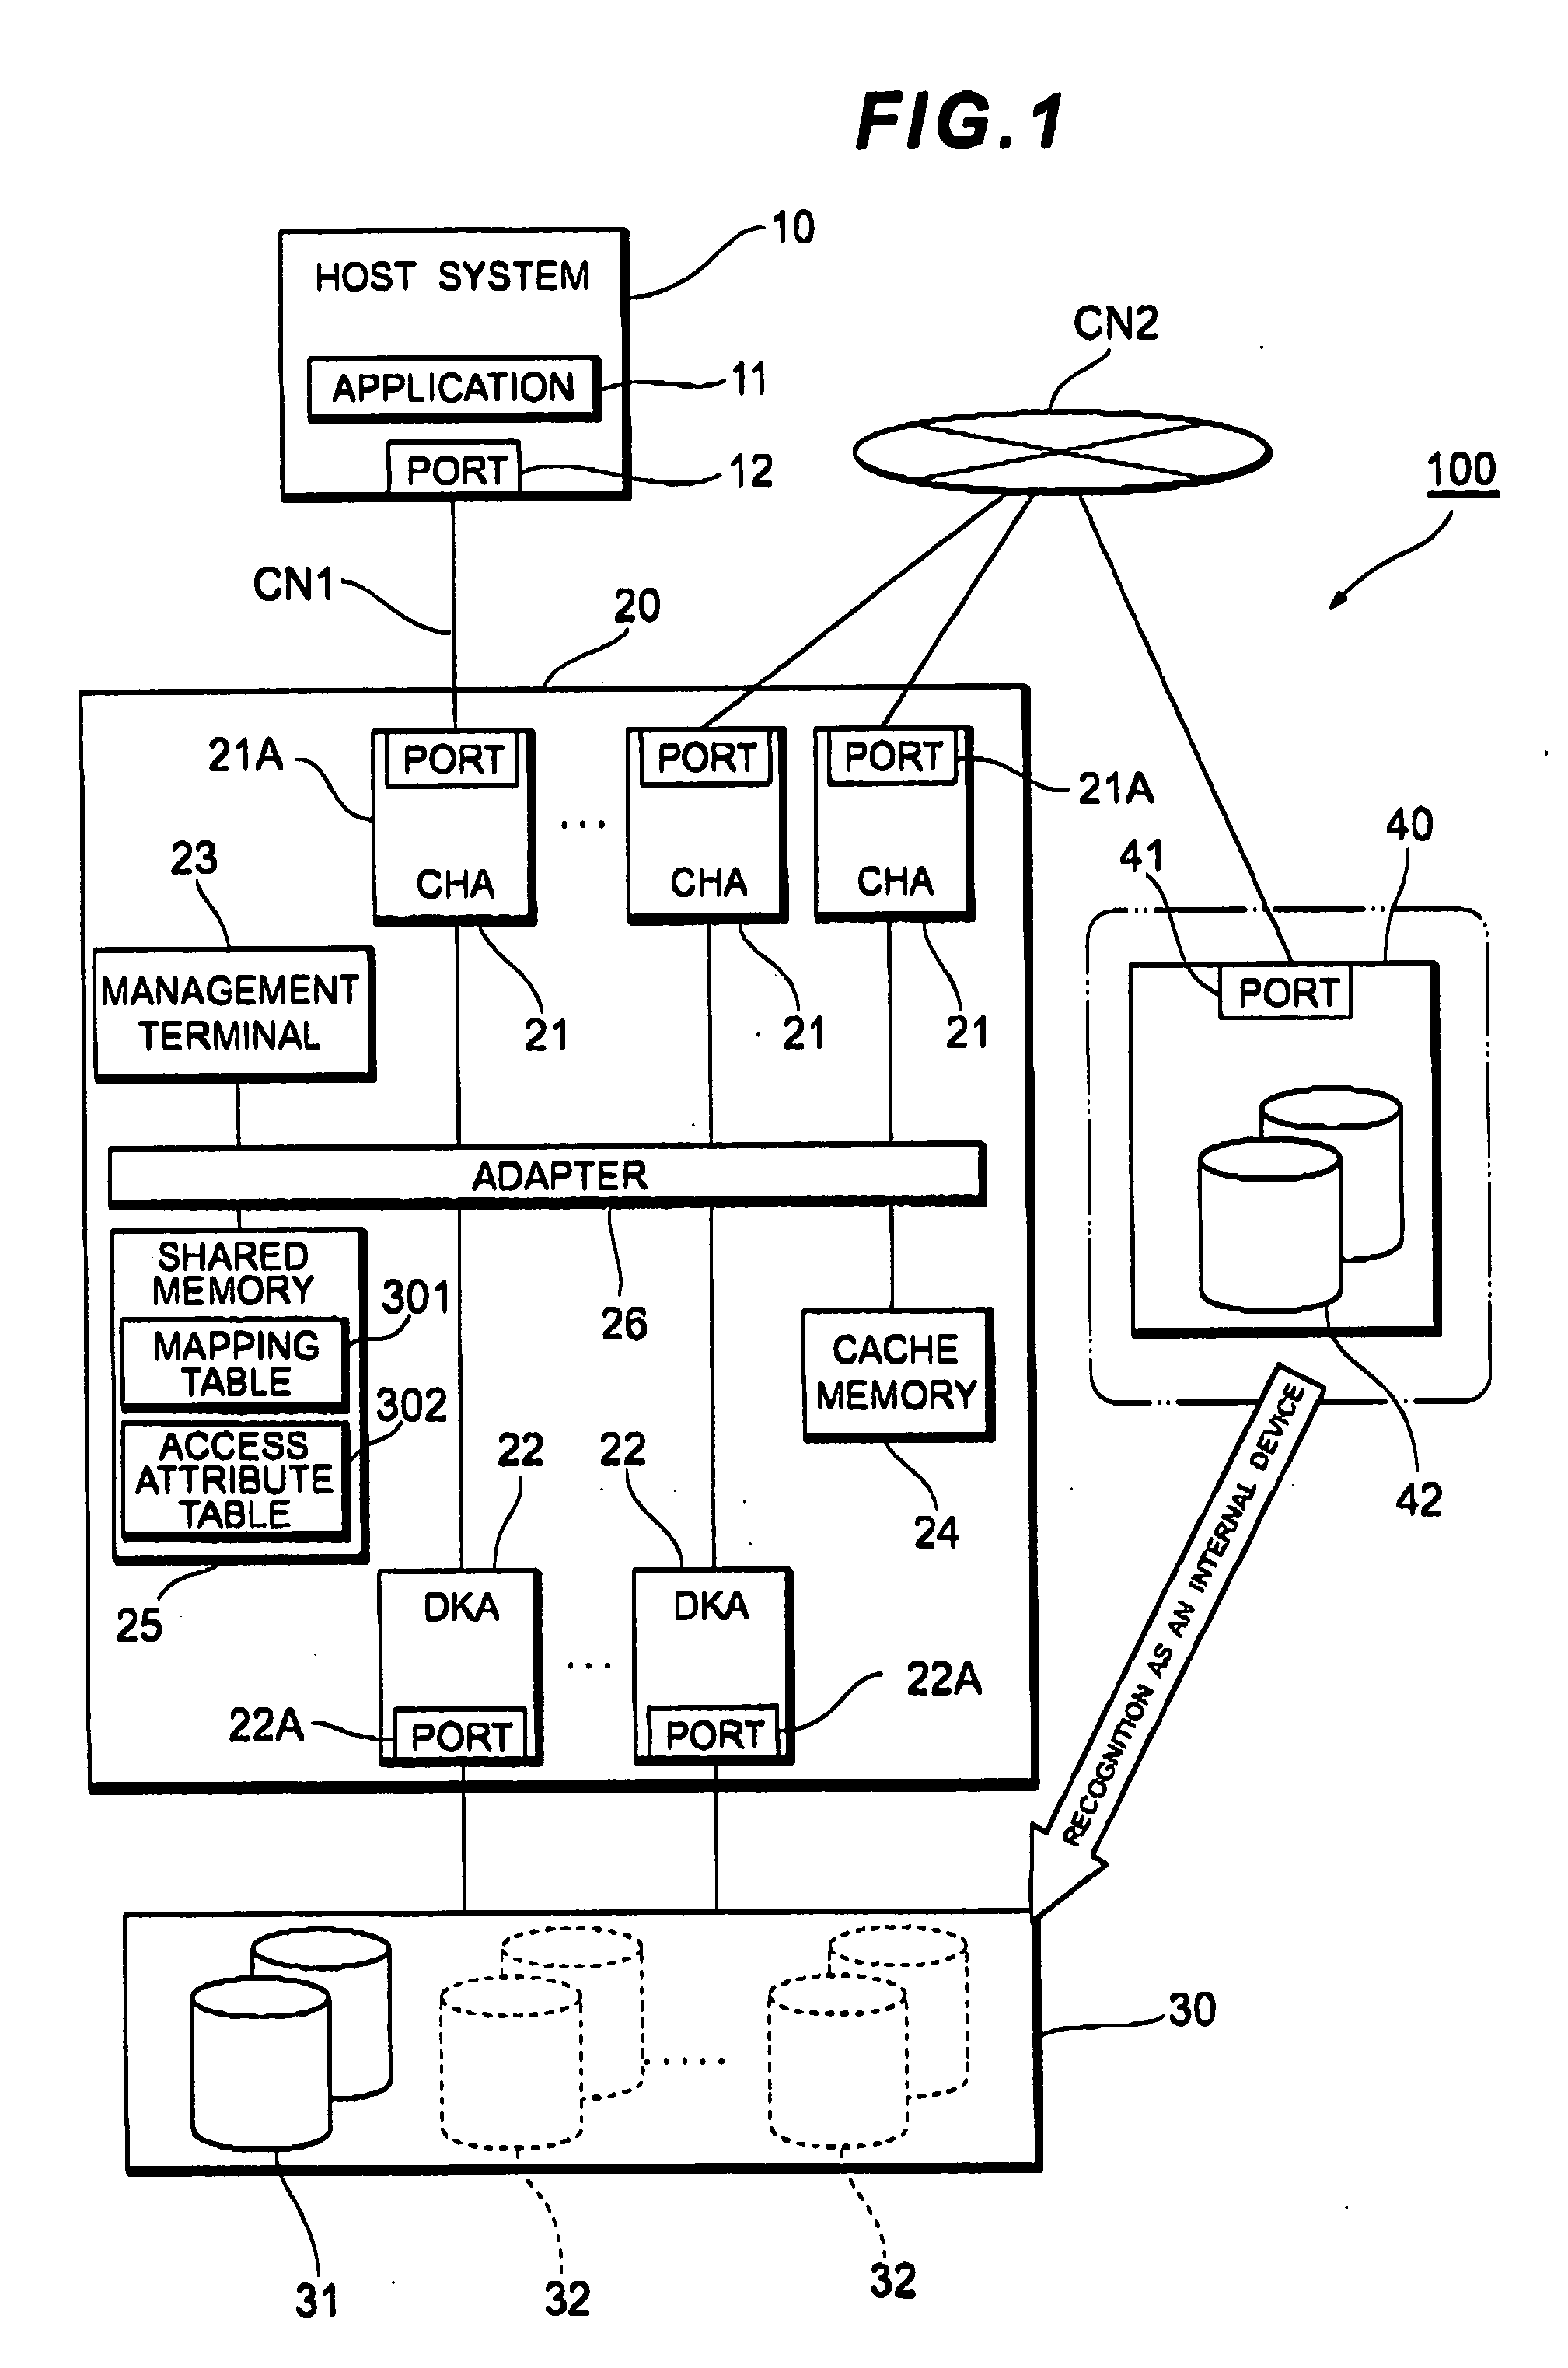 Storage controller and storage system